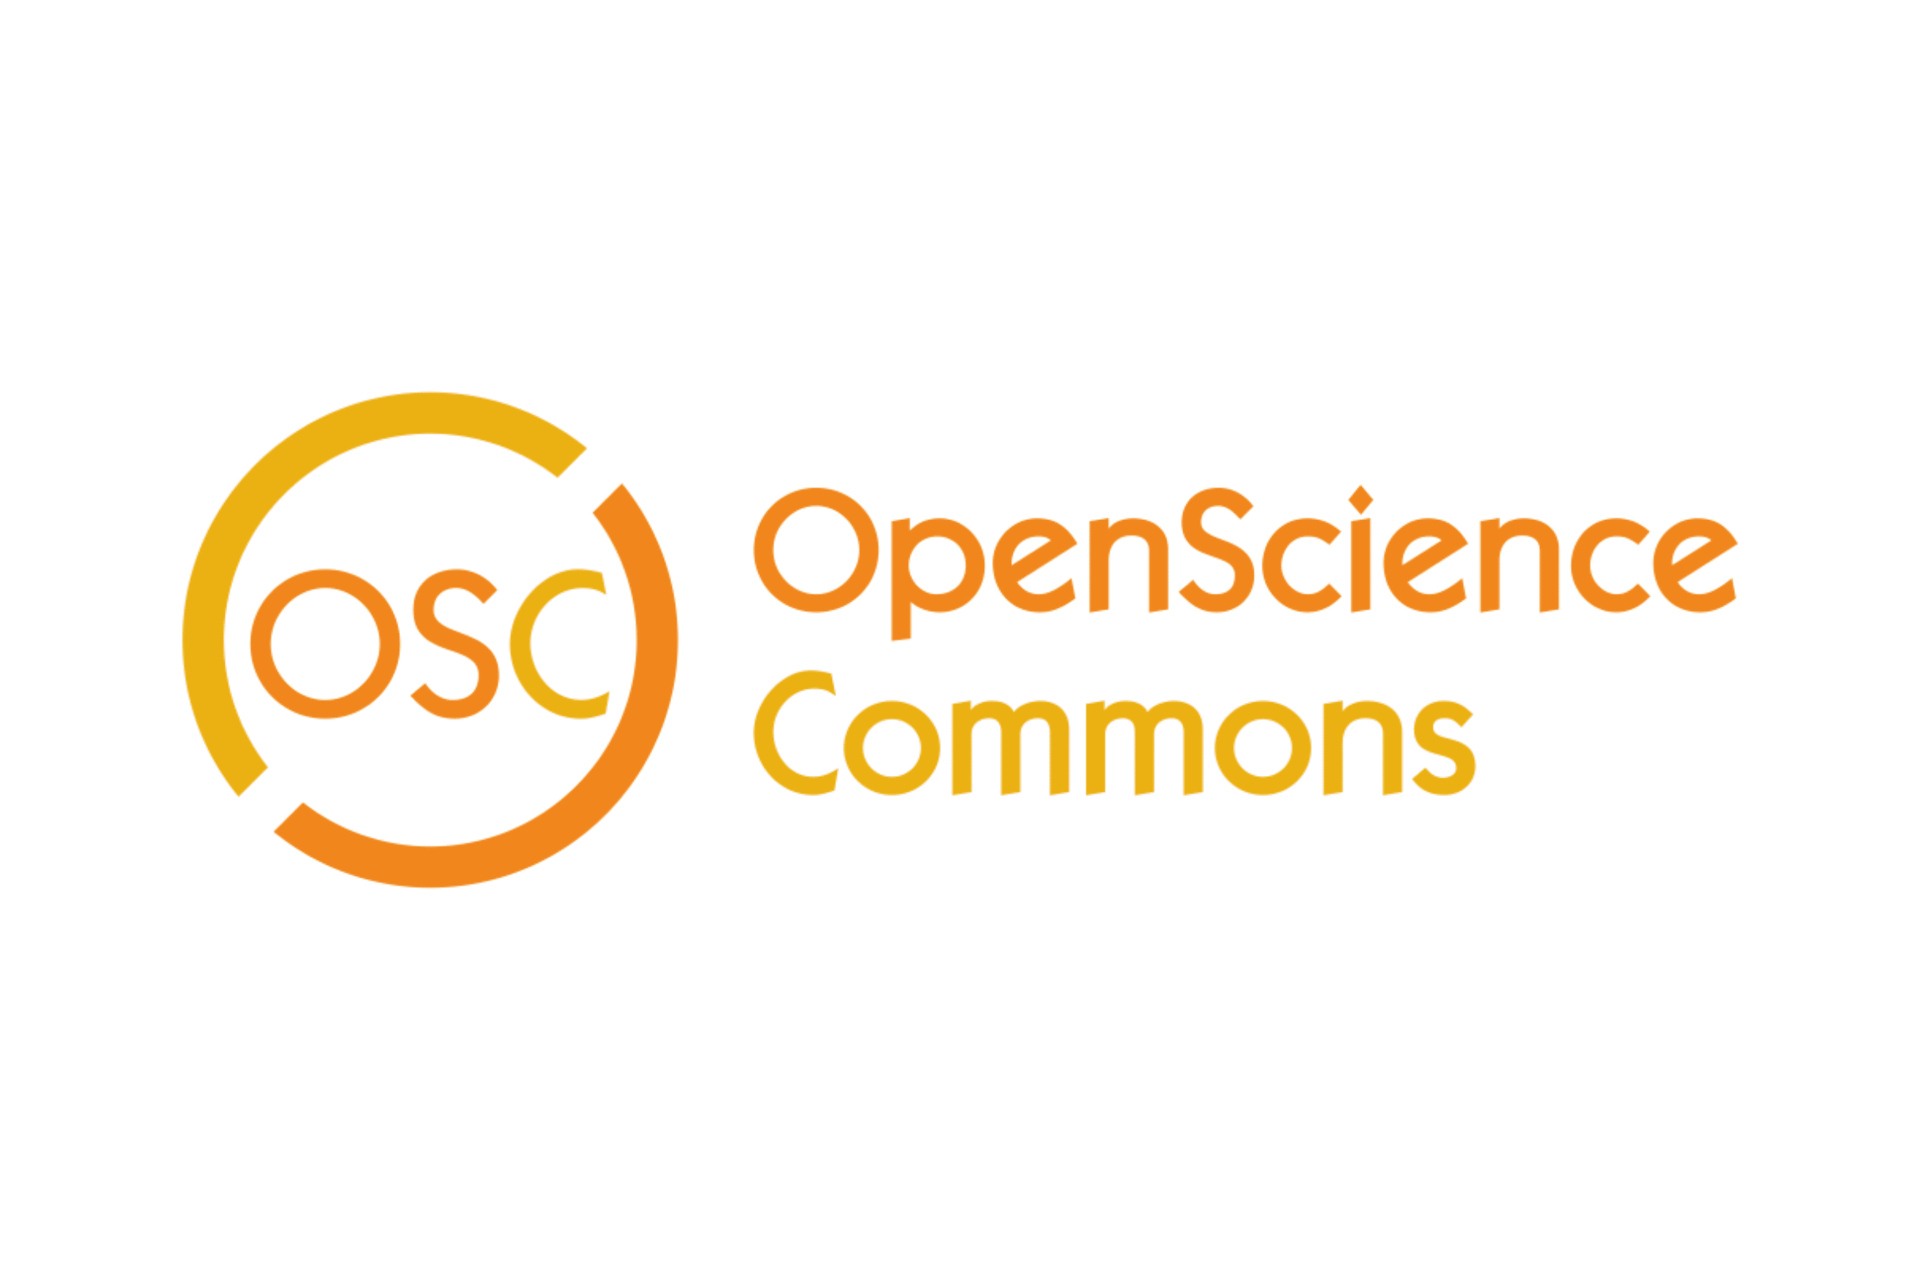 Logo of the Open Science Commons policy initiative